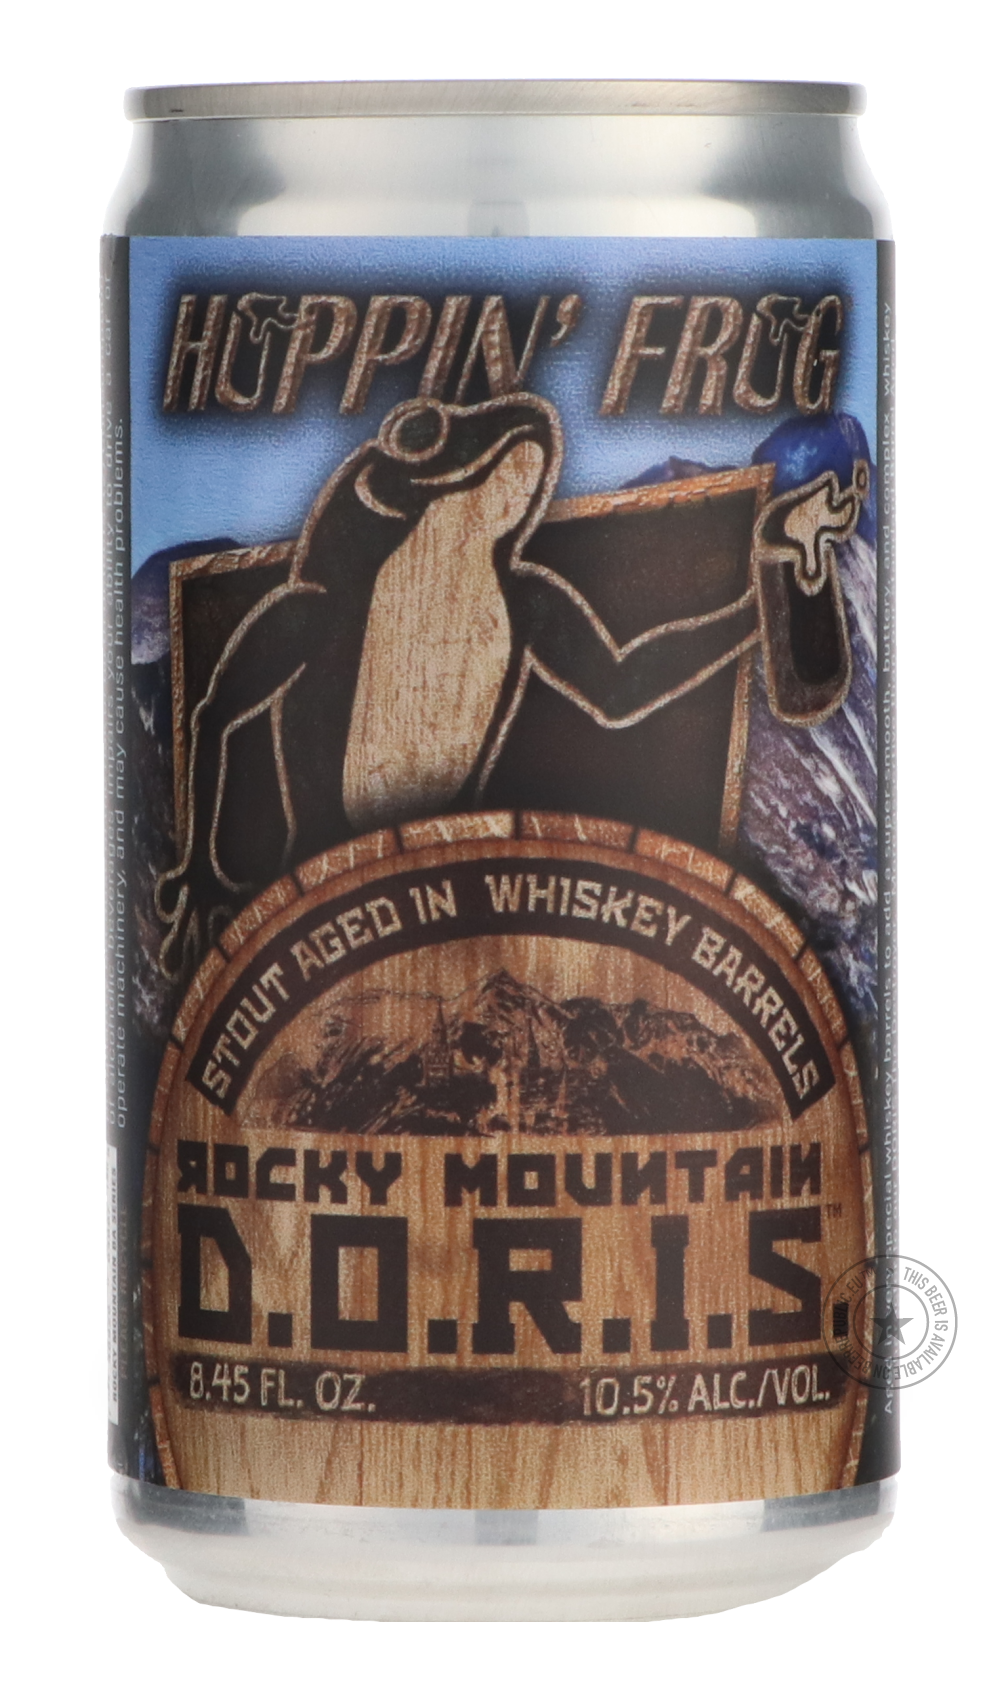 -Hoppin' Frog- Rocky Mountain Barrel Aged D.O.R.I.S.-Stout & Porter- Only @ Beer Republic - The best online beer store for American & Canadian craft beer - Buy beer online from the USA and Canada - Bier online kopen - Amerikaans bier kopen - Craft beer store - Craft beer kopen - Amerikanisch bier kaufen - Bier online kaufen - Acheter biere online - IPA - Stout - Porter - New England IPA - Hazy IPA - Imperial Stout - Barrel Aged - Barrel Aged Imperial Stout - Brown - Dark beer - Blond - Blonde - Pilsner - La